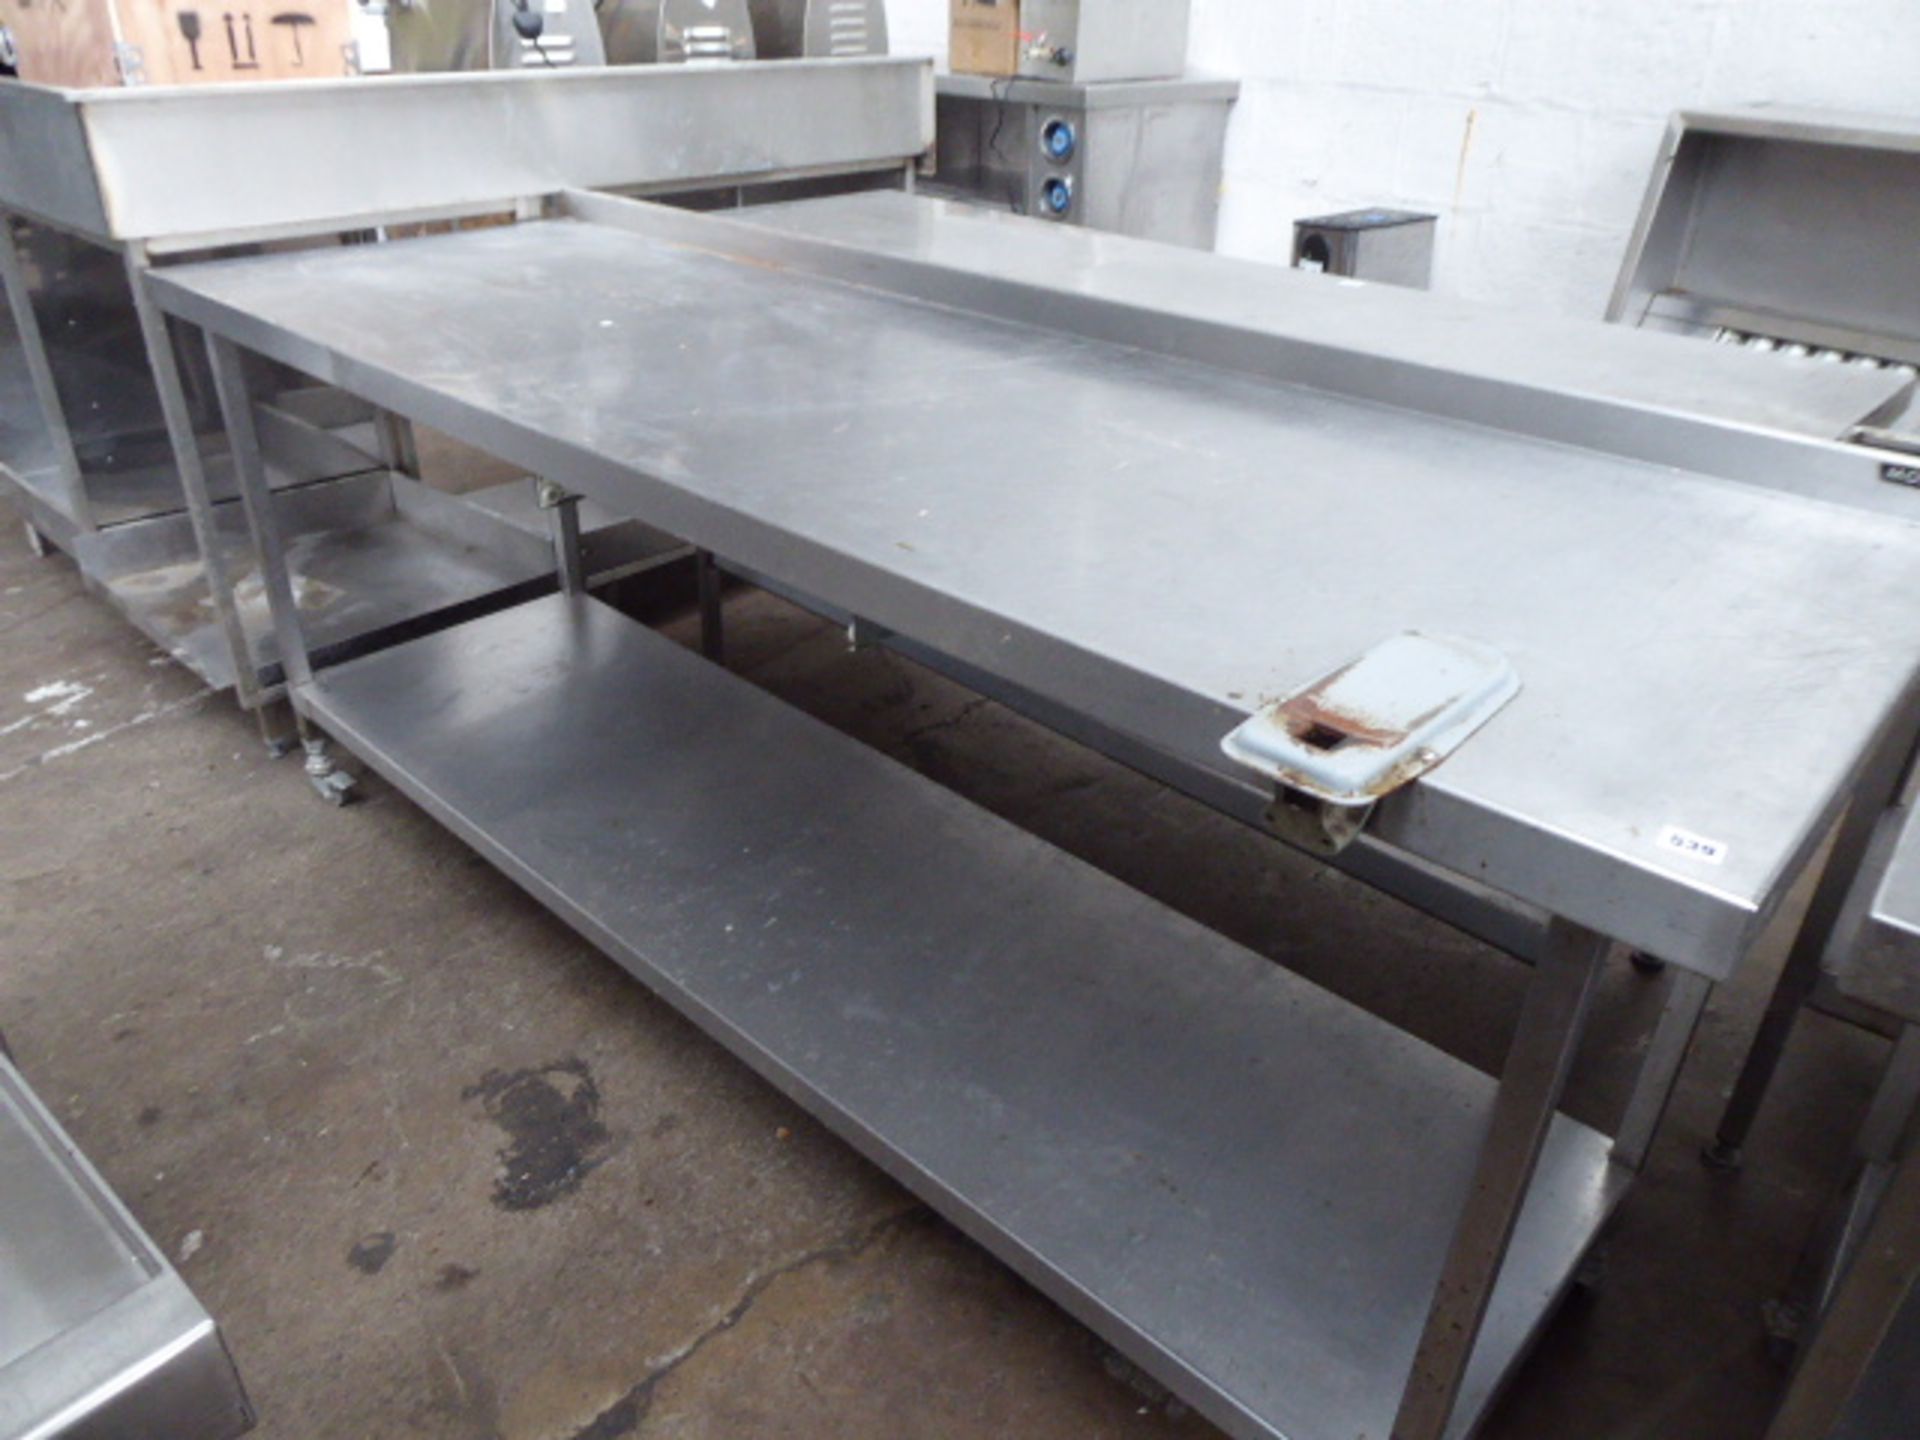 200cm stainless steel prep table with shelf under